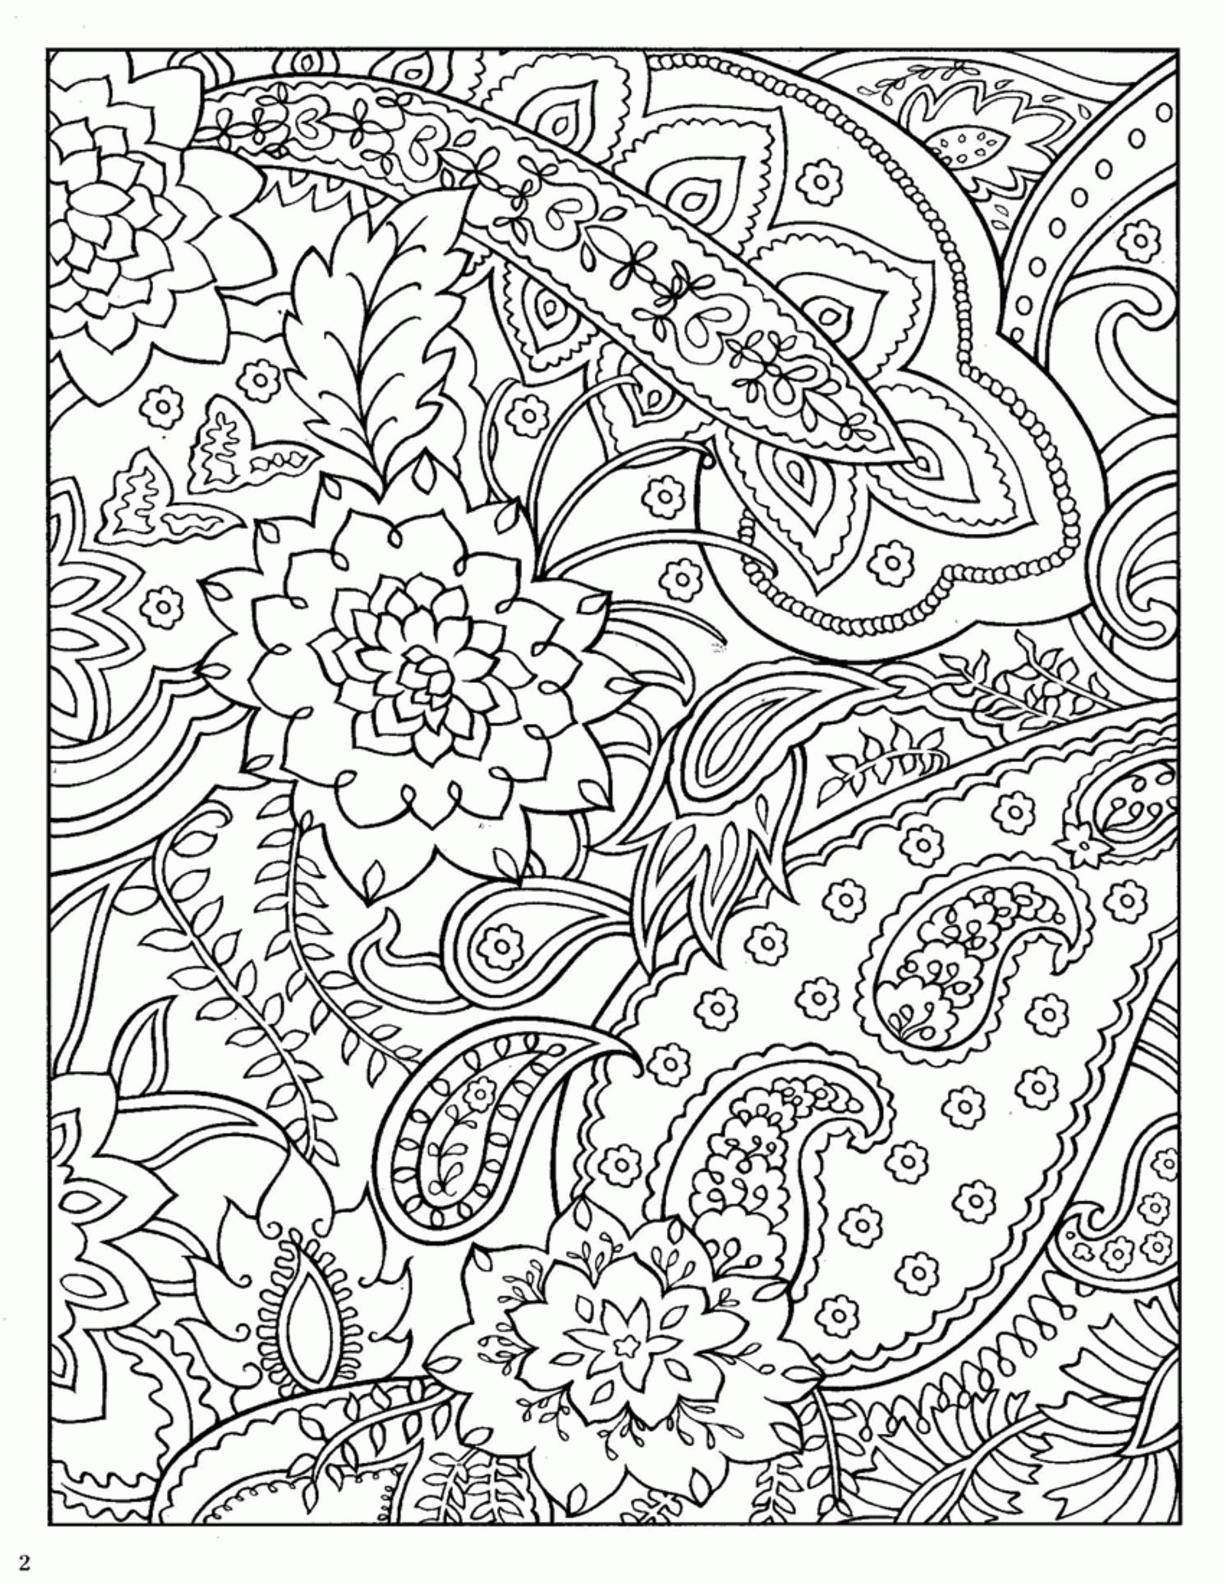 Free Paisley Coloring Pages Printable Download Free Paisley Coloring